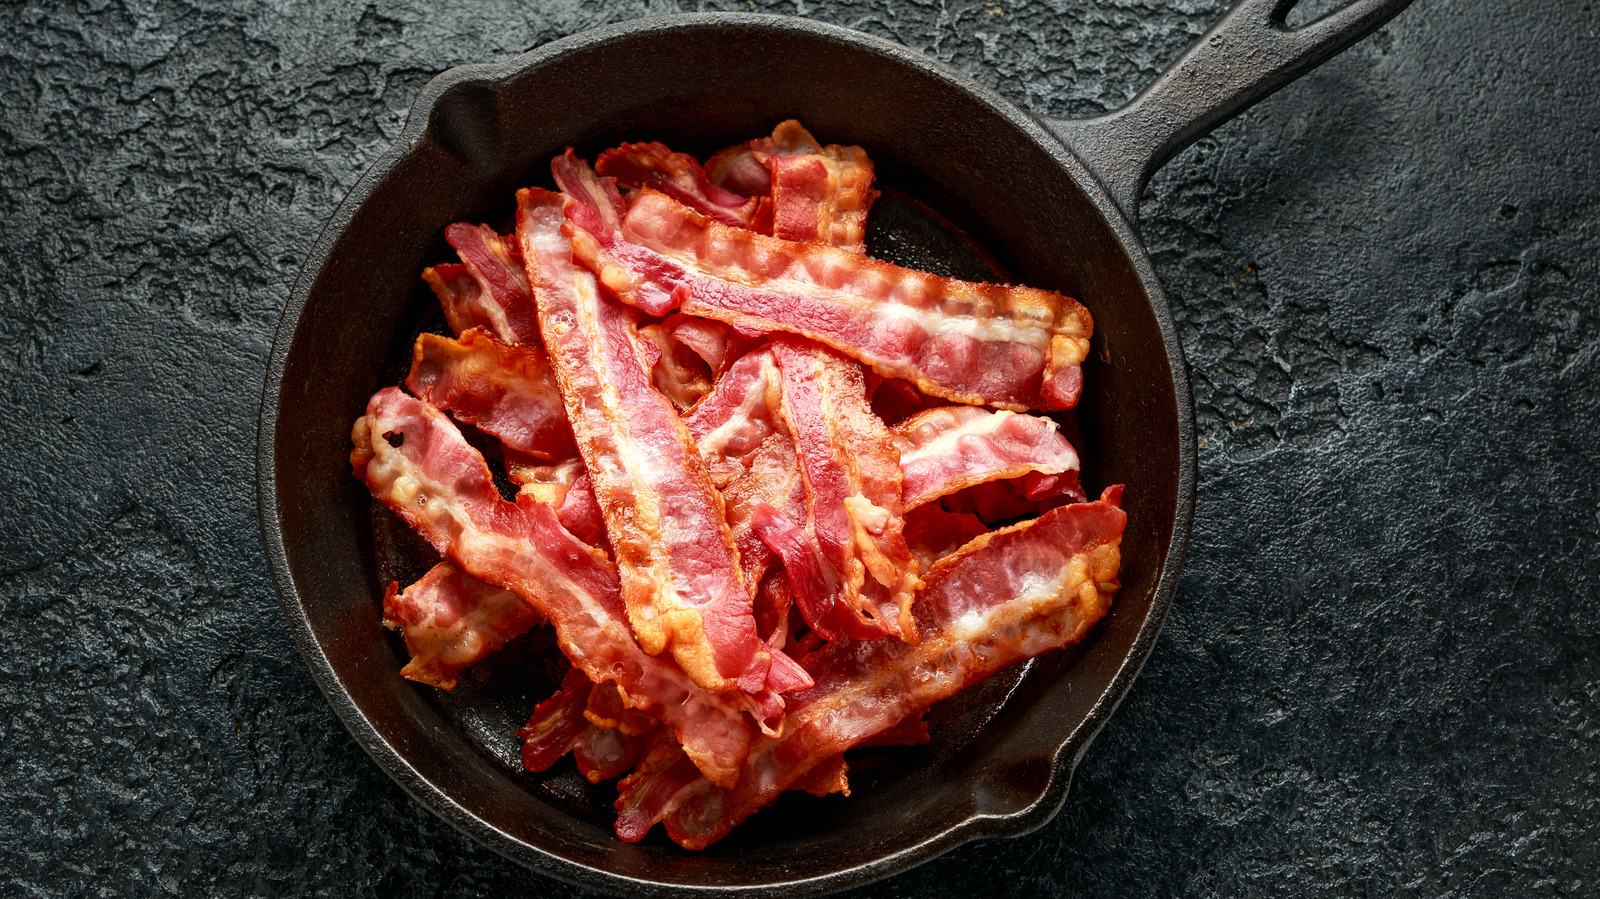 https://www.foodrepublic.com/img/gallery/why-you-should-never-use-a-hot-pan-to-cook-bacon/l-intro-1701365347.jpg